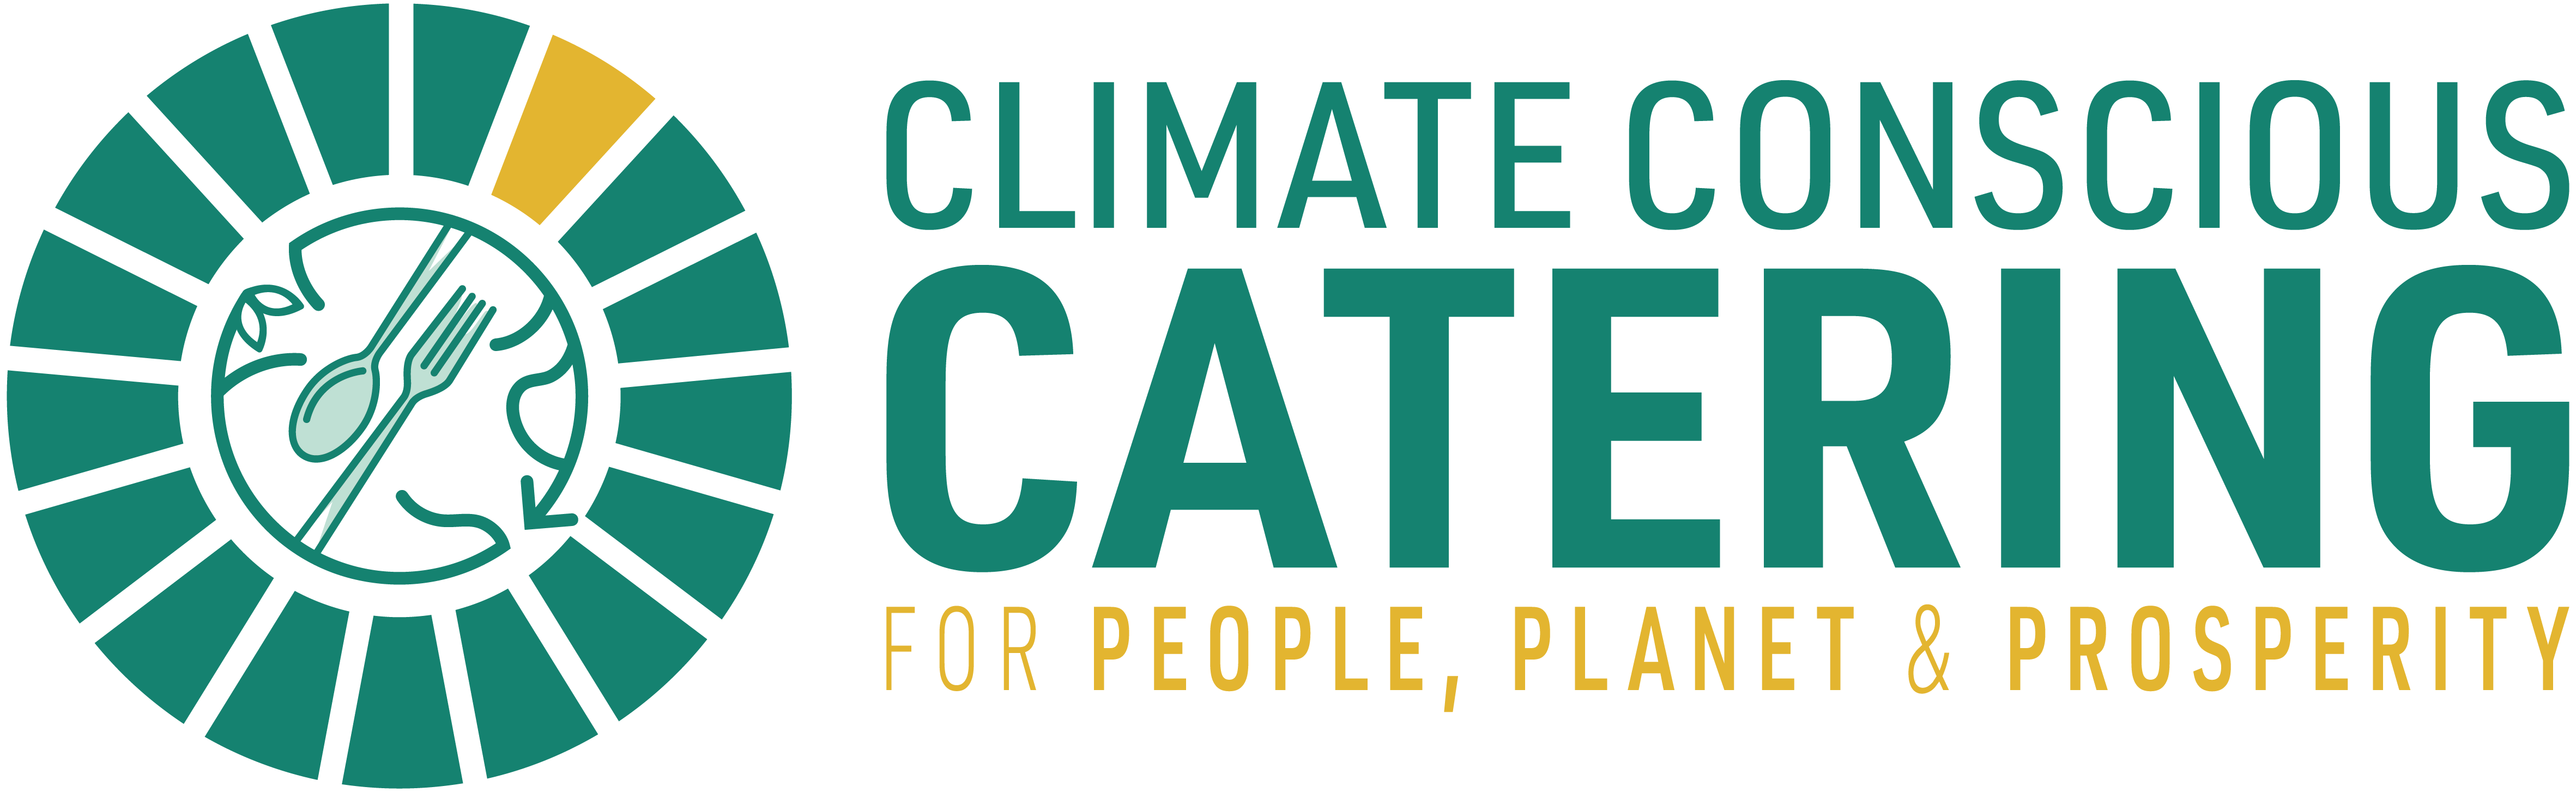 Climate Conscious Catering